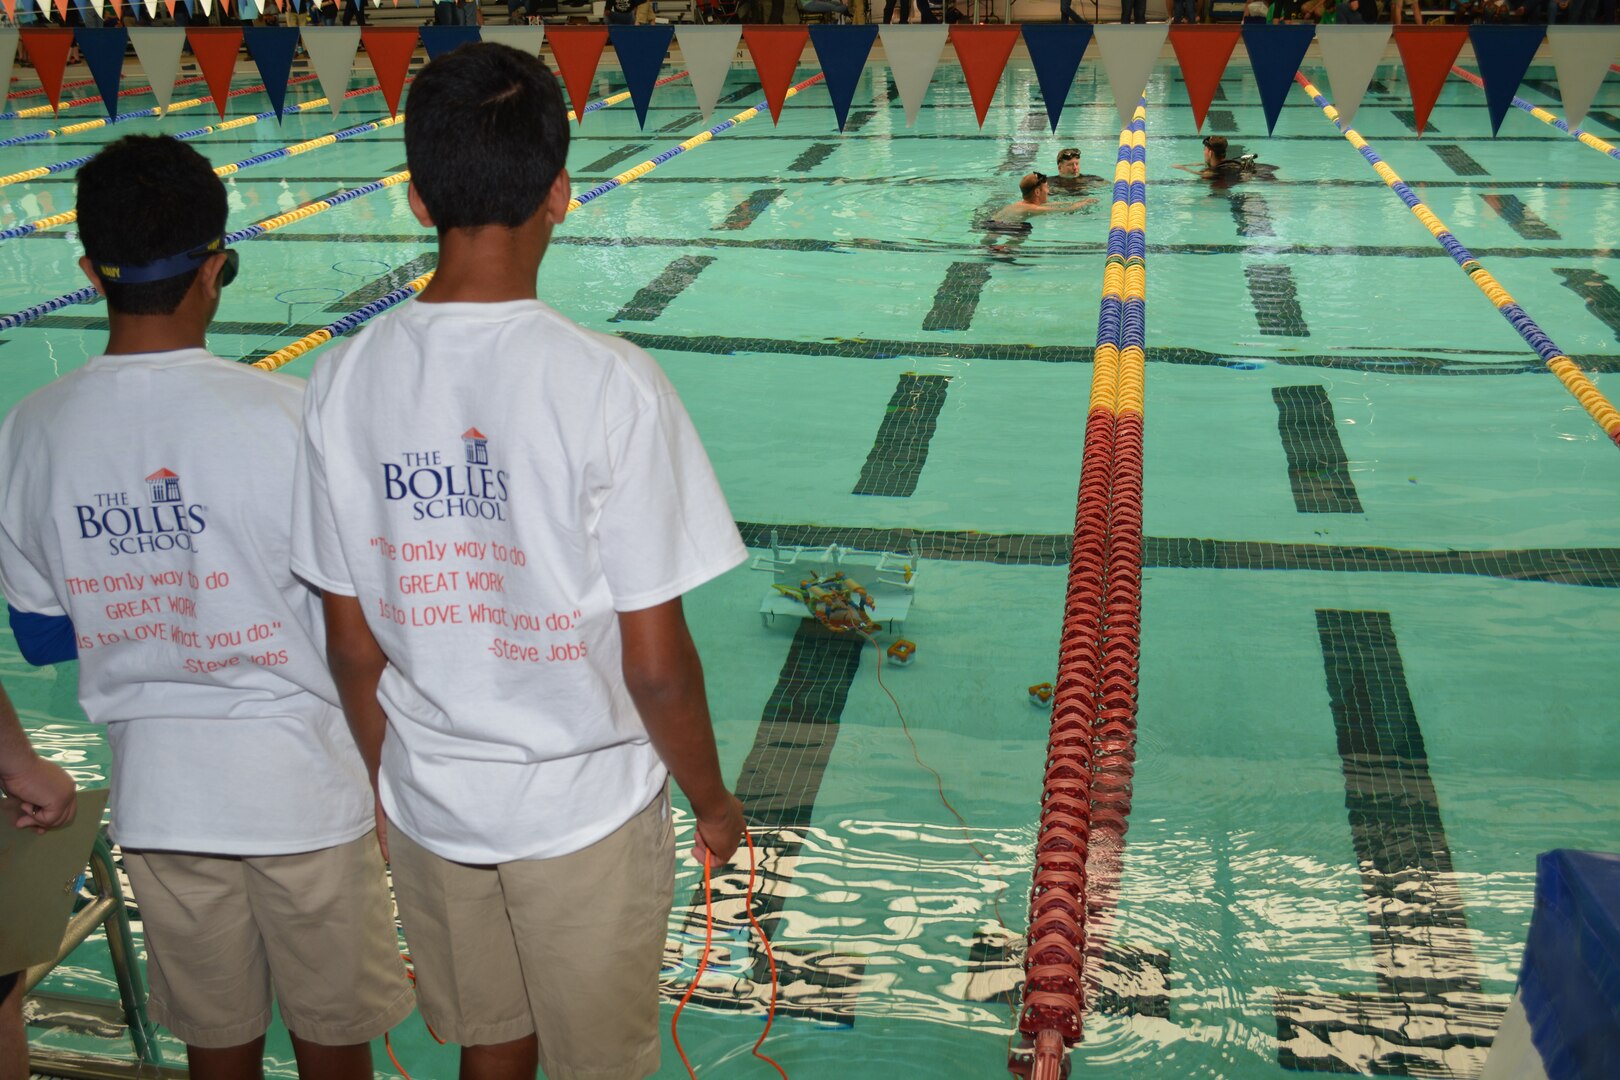 Middle school students from Bolles Middle School operate their SeaPerch remotely operated vehicle (ROV) in the regional SeaPerch competition held in Jacksonville, Fla. Divers from Southeast Regional Maintenance Center (SERMC) volunteered to assist with the competition, pictured in the background. SERMC’s STEM outreach program includes 35 schools and supports over 500 students every year.